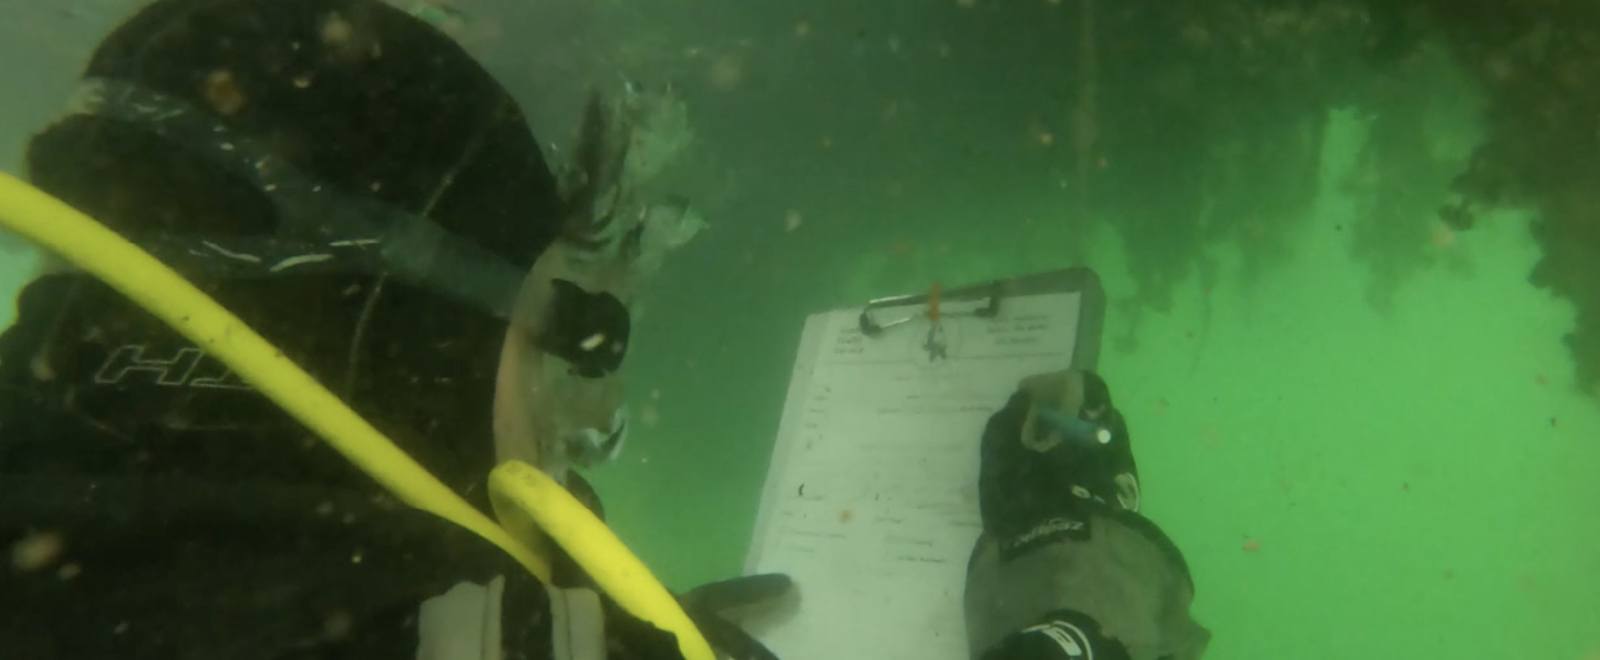 scuba diver underwater writing on water proof paper